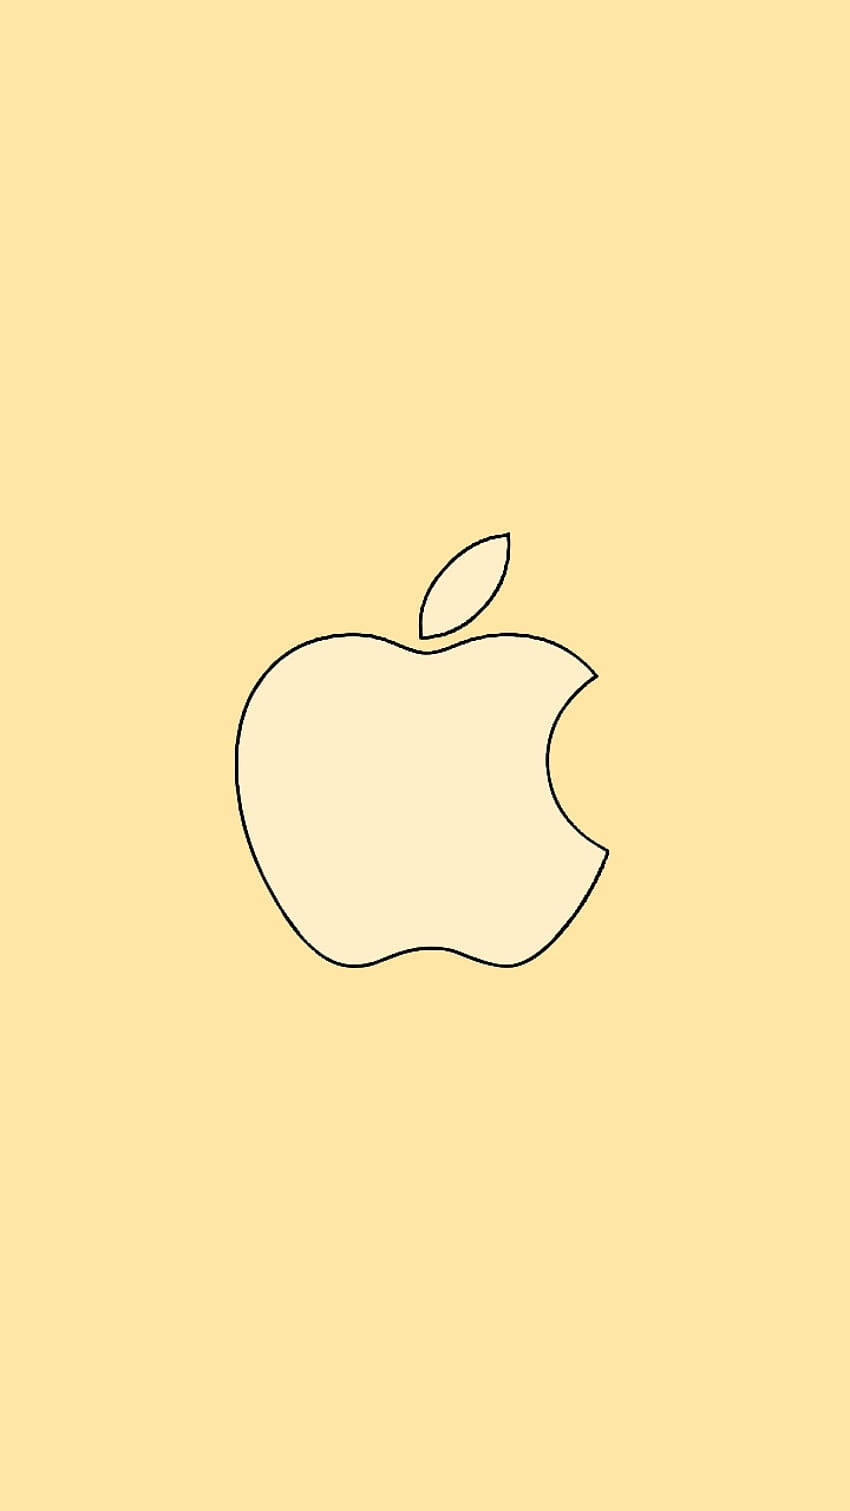 Apple Logo Colorful Iphone 5s Background